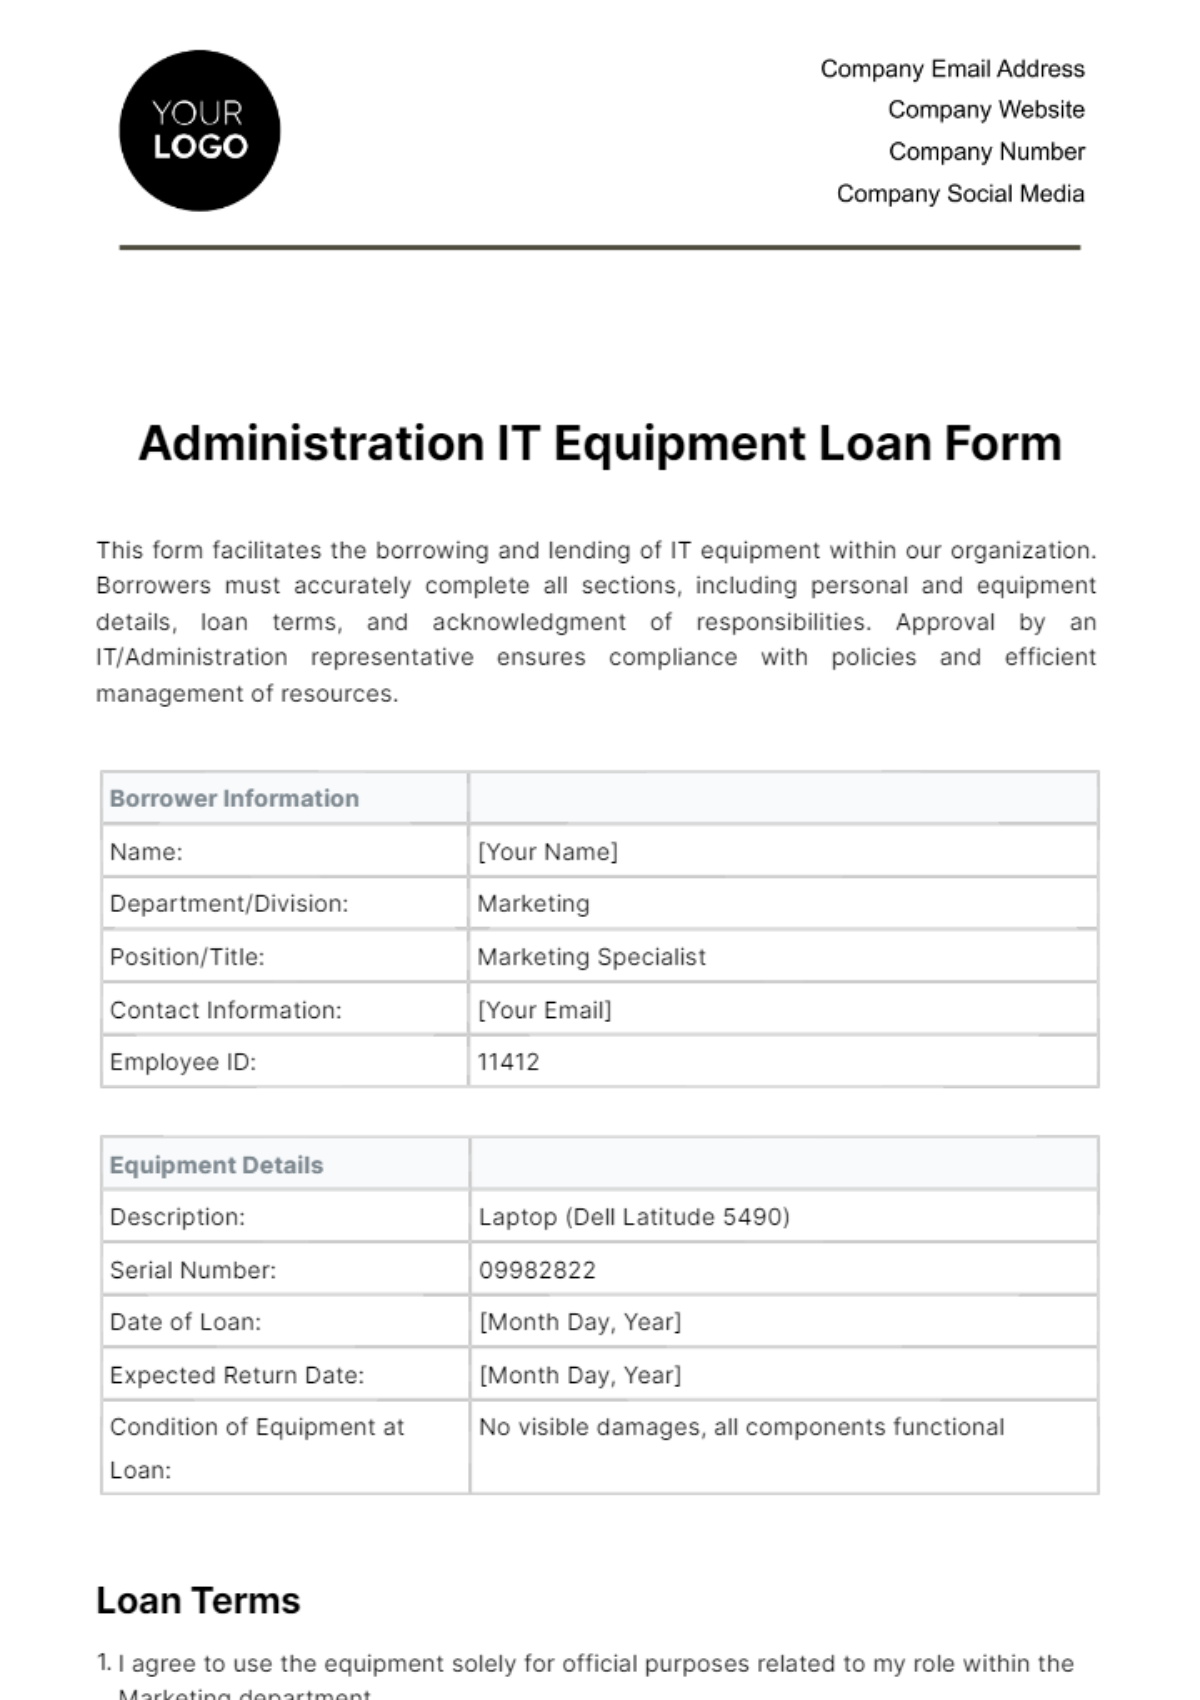 Free Administration IT Equipment Loan Form Template